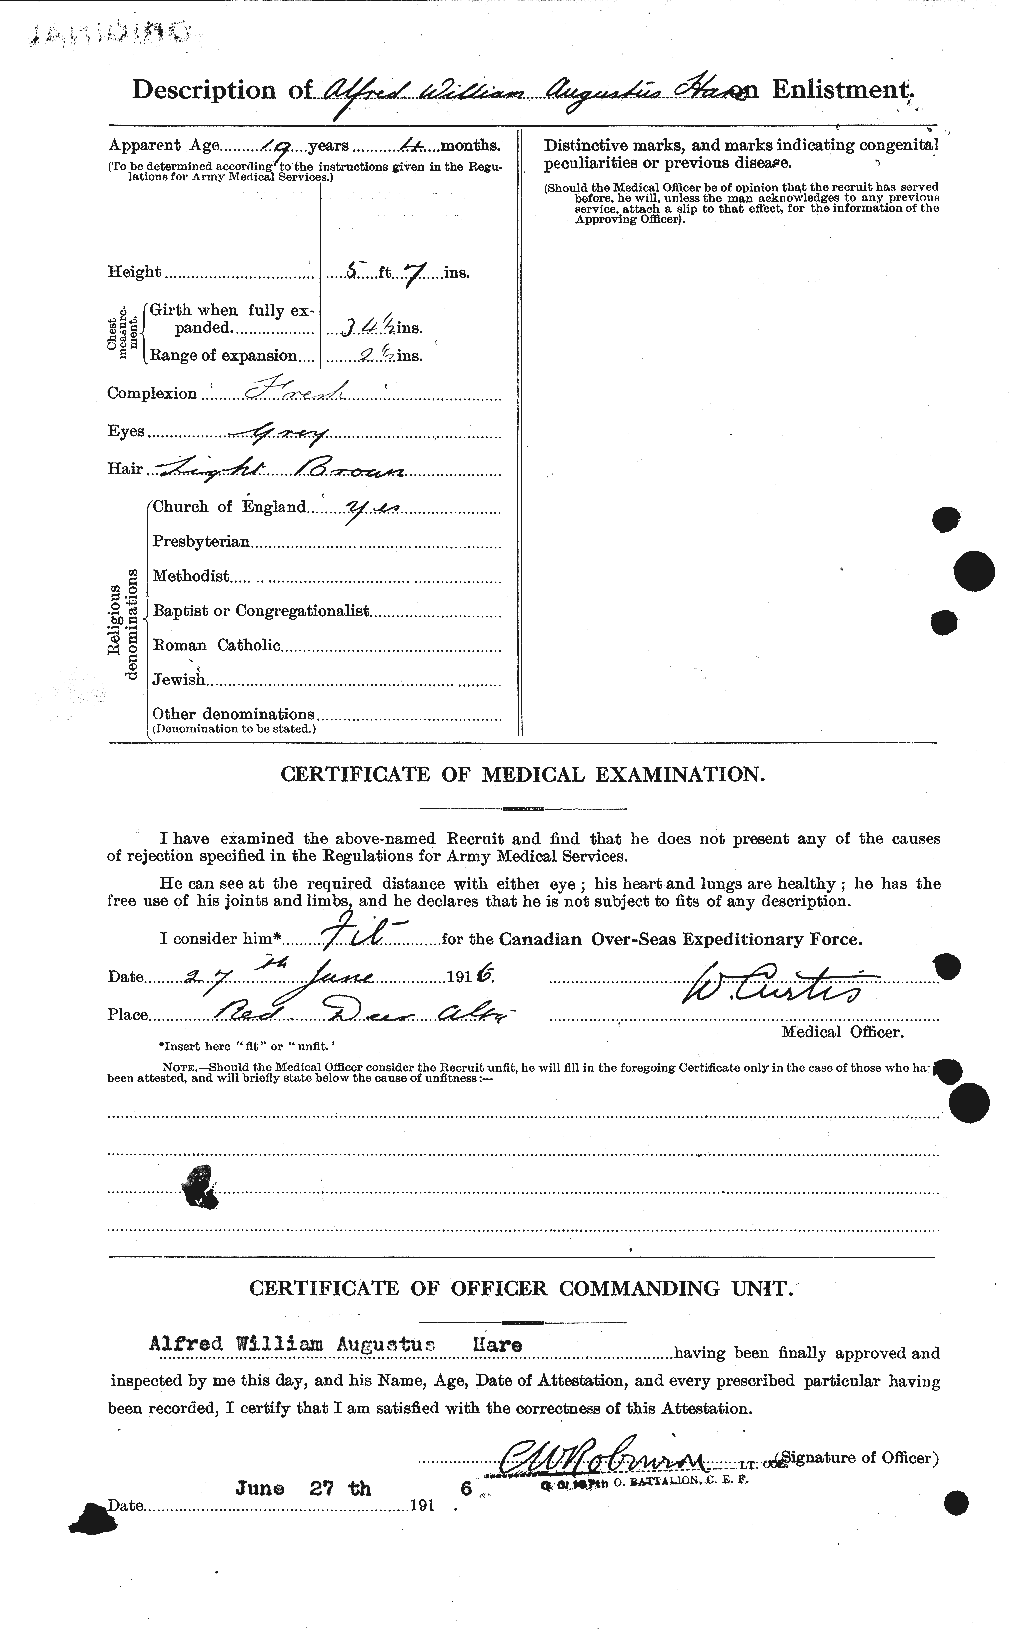 Personnel Records of the First World War - CEF 377885b